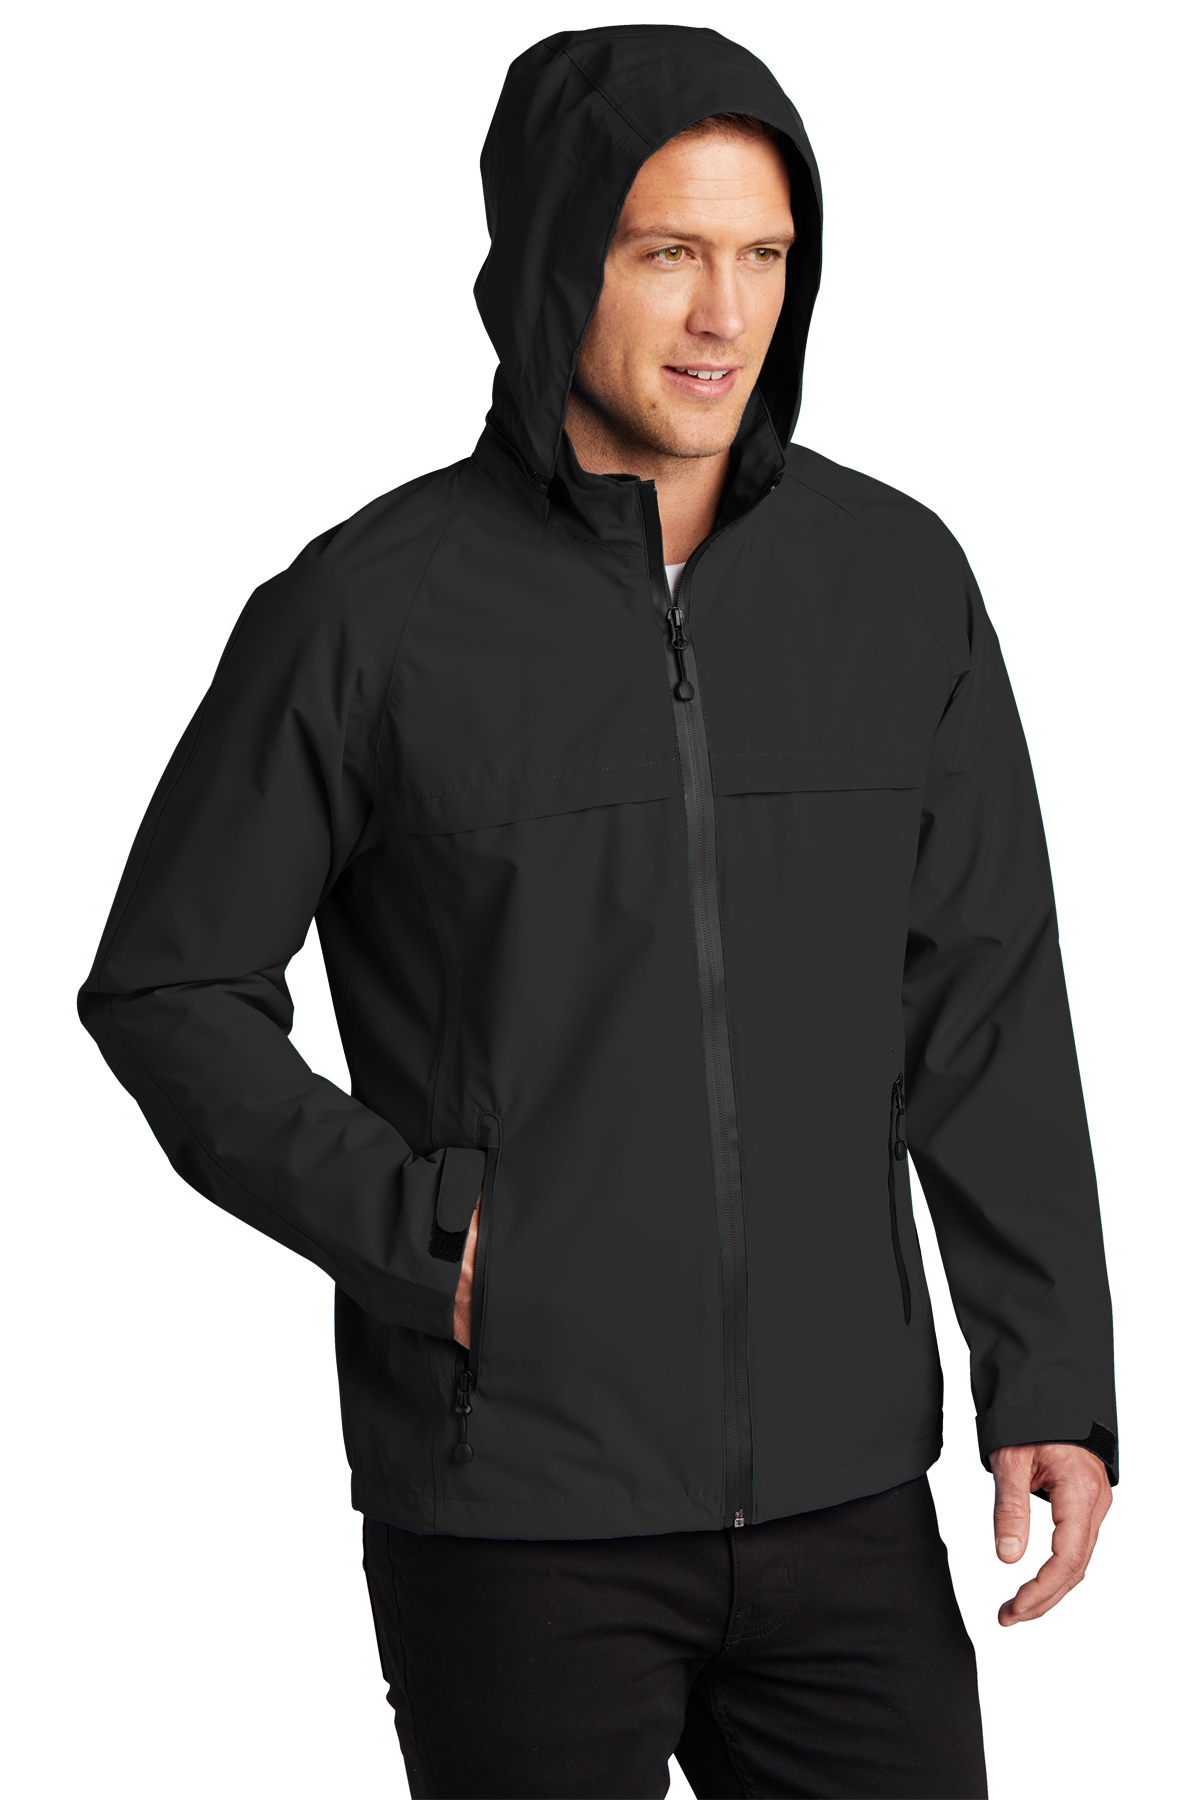 Port Authority Tall Torrent Waterproof Jacket | Product | Port Authority